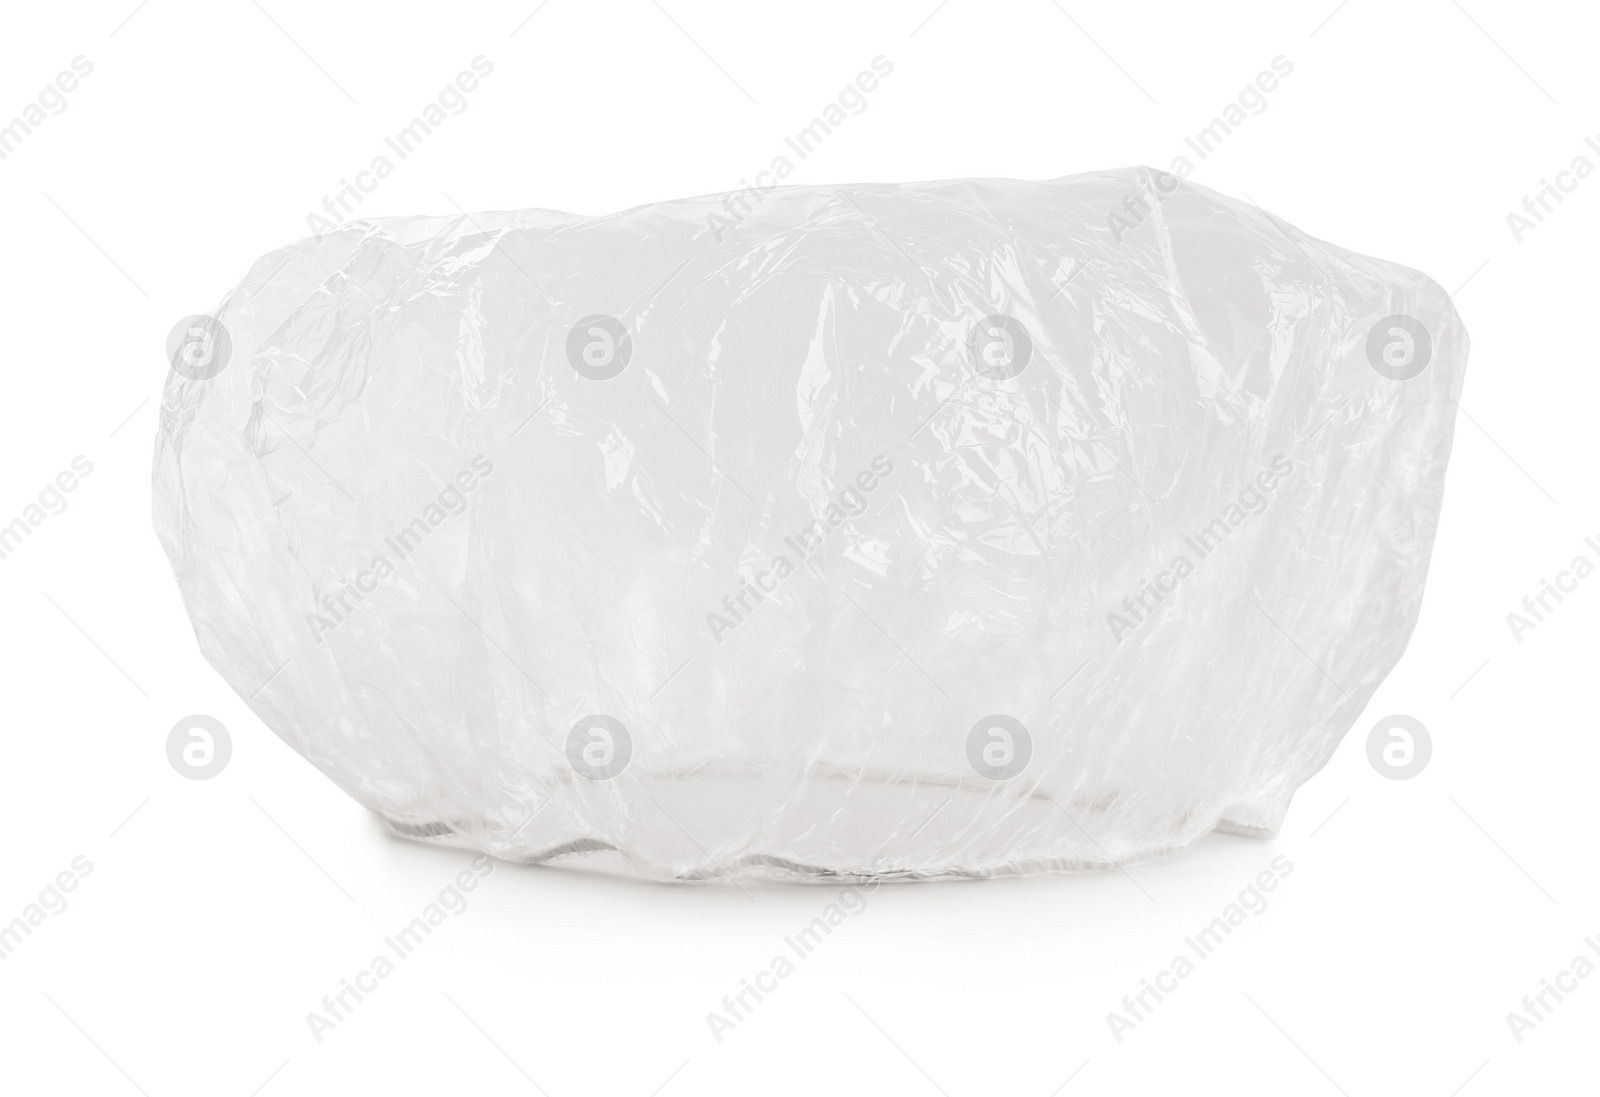 Photo of Transparent waterproof shower cap on white background